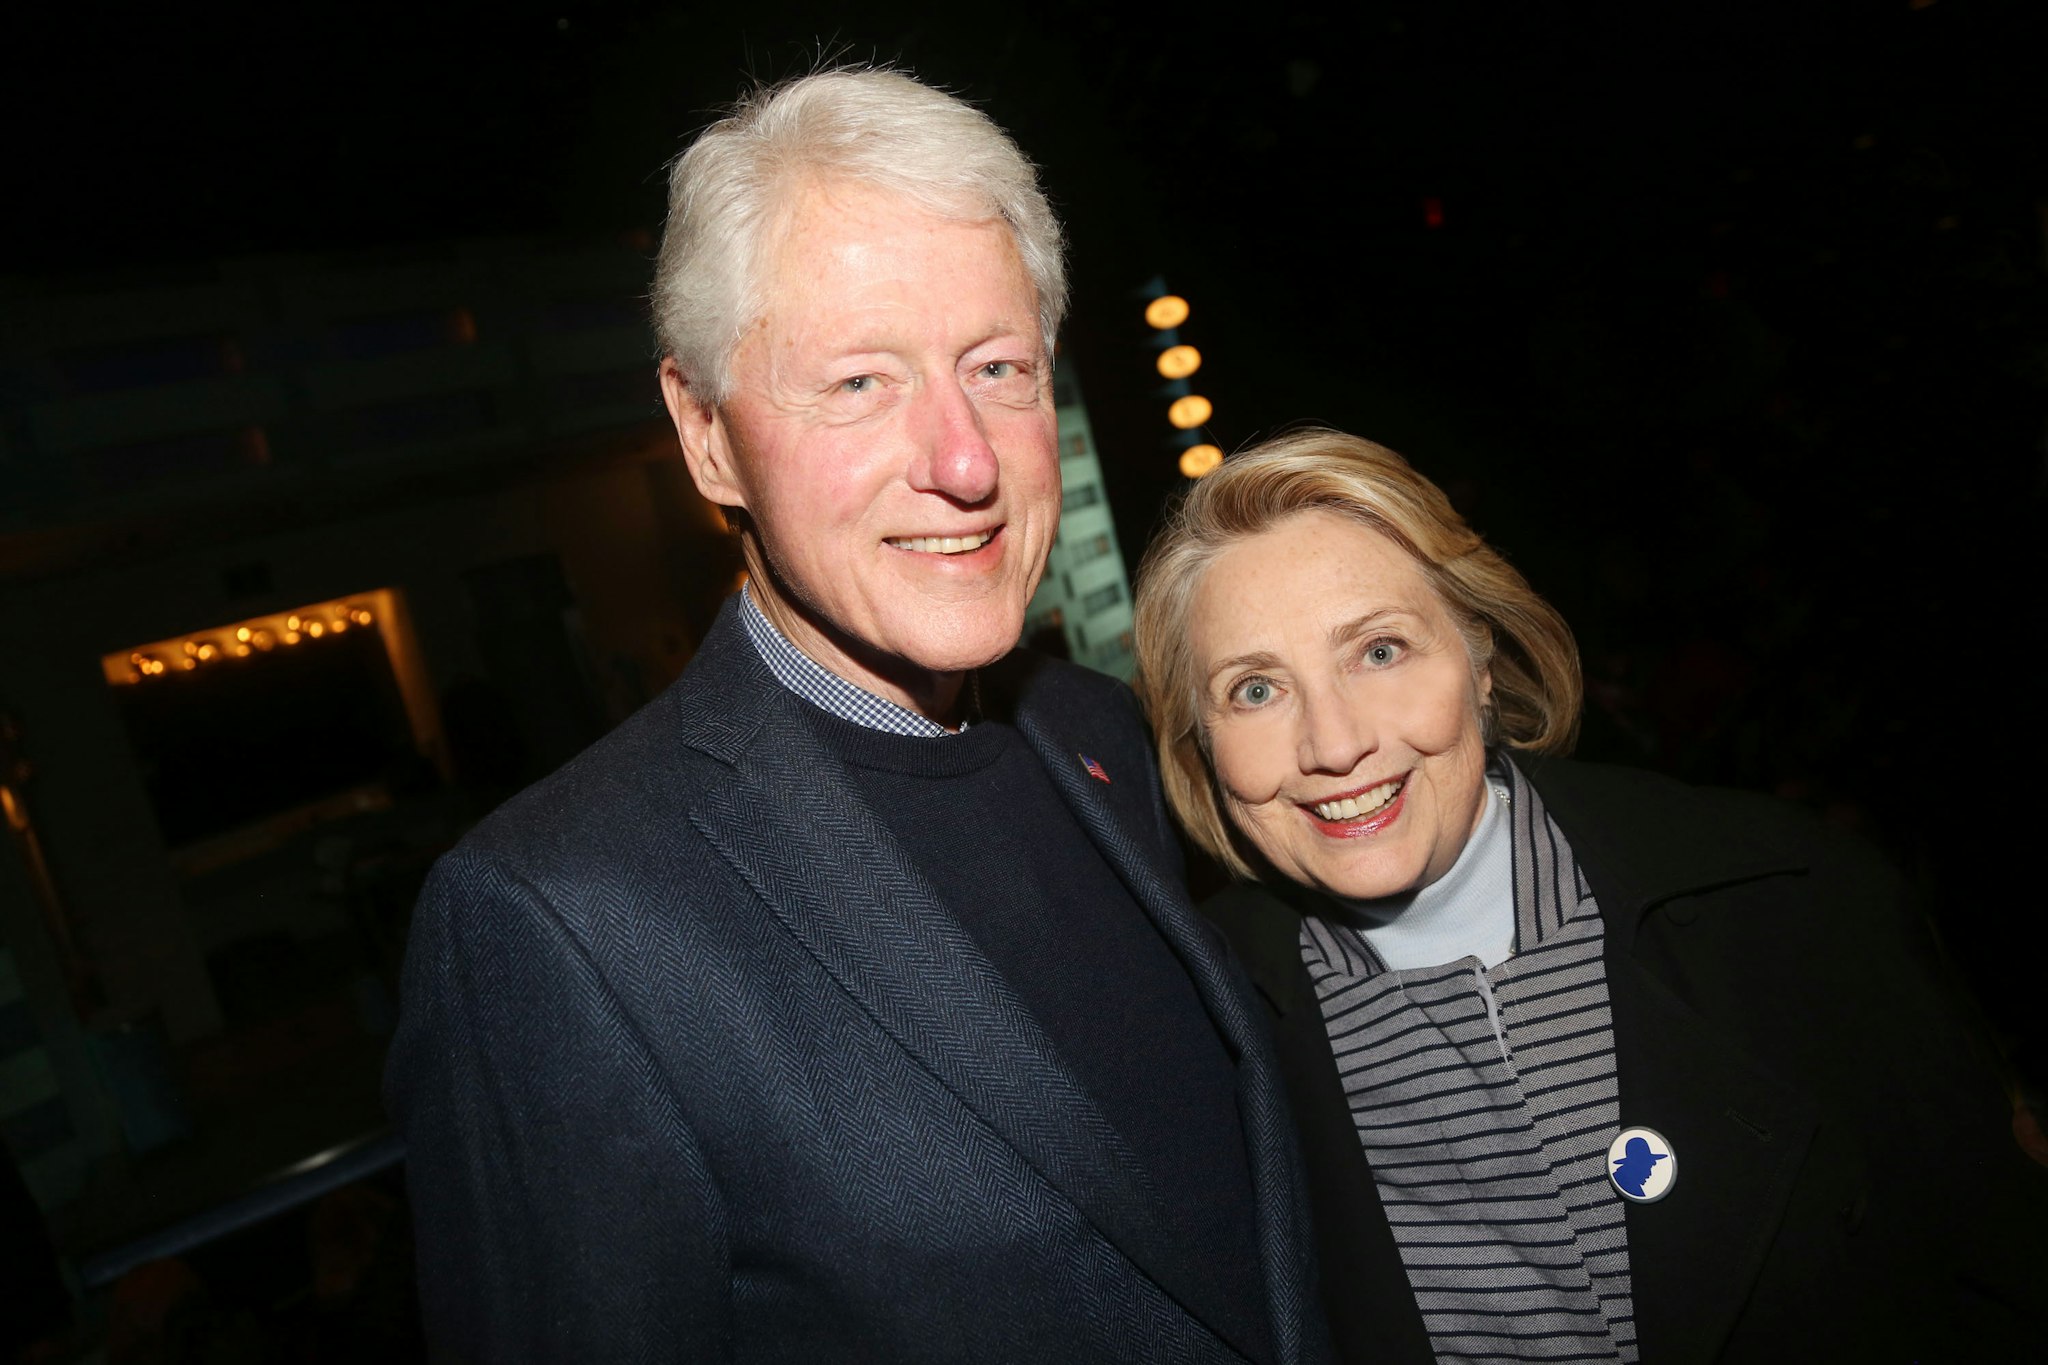 NEW YORK,NEW YORK - OCTOBER 22: (EXCLUSIVE COVERAGE) 42nd President of the United States Bill Clinton and 67th United States secretary of state Hillary Rodham Clinton pose at the opening night of the new Manhattan Theatre Club play "Bella Bella" at MTC Stage 1 Theatre at City Center on October 22, 2019 in New York City. (Photo by Bruce Glikas/Getty Images)